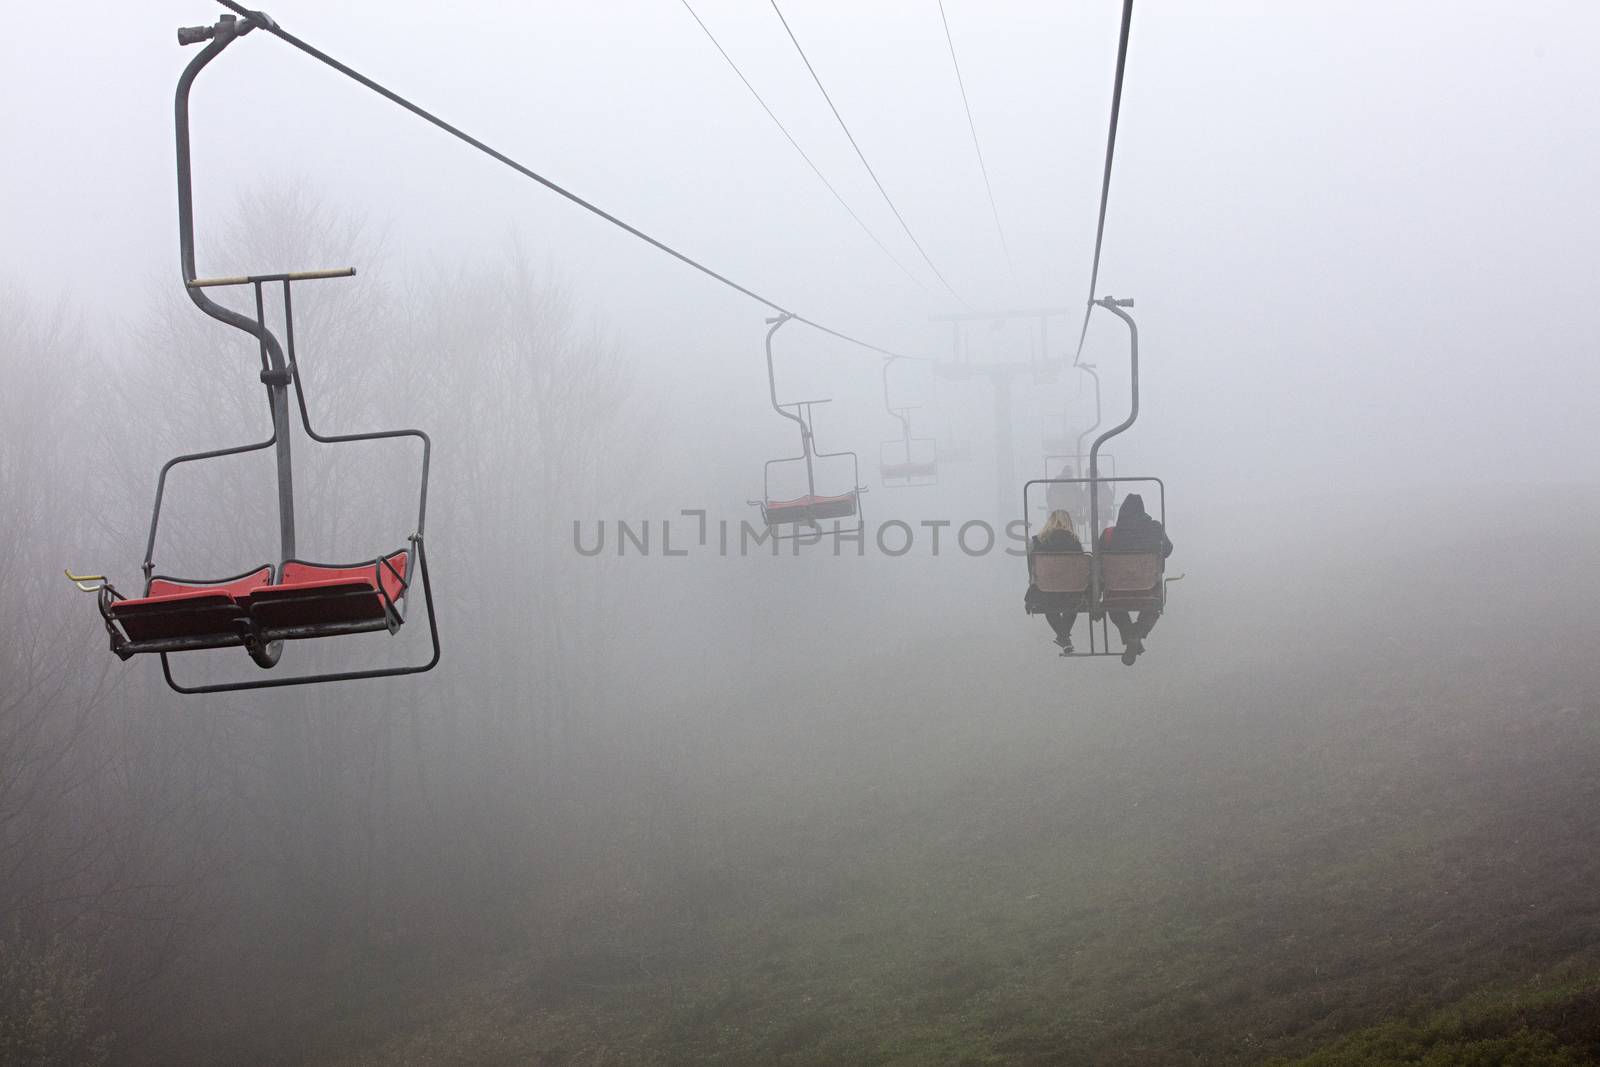 Early in the morning, a mountain lift takes tourists to a sleeping mountain, enveloped in a very dense fog